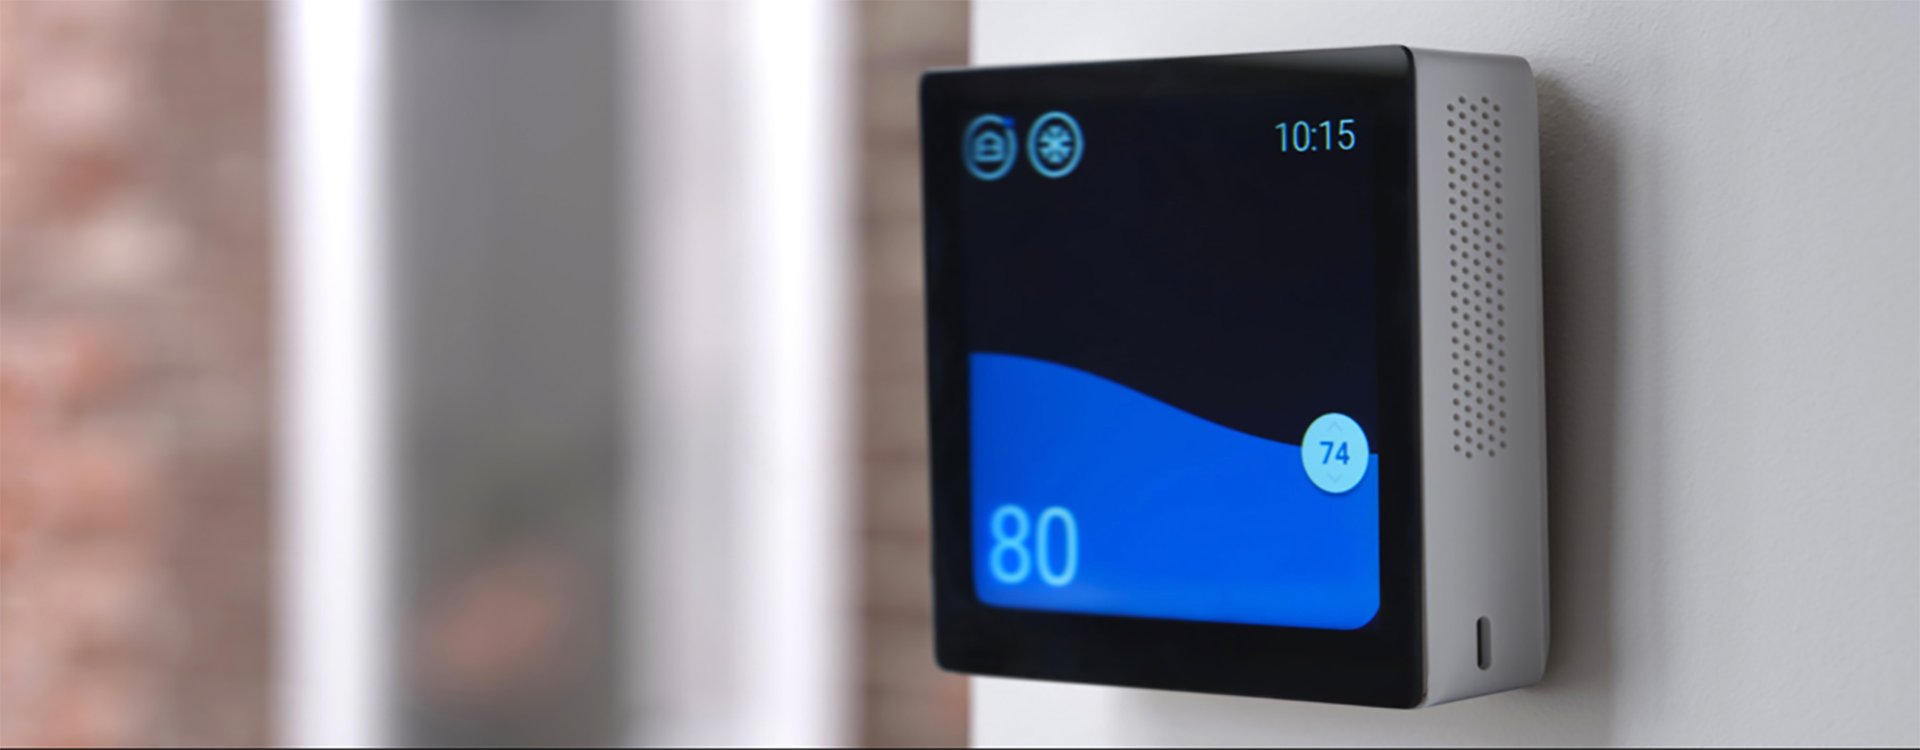 UEI Smart Thermostat Platform Expands Capabilities with Matter and